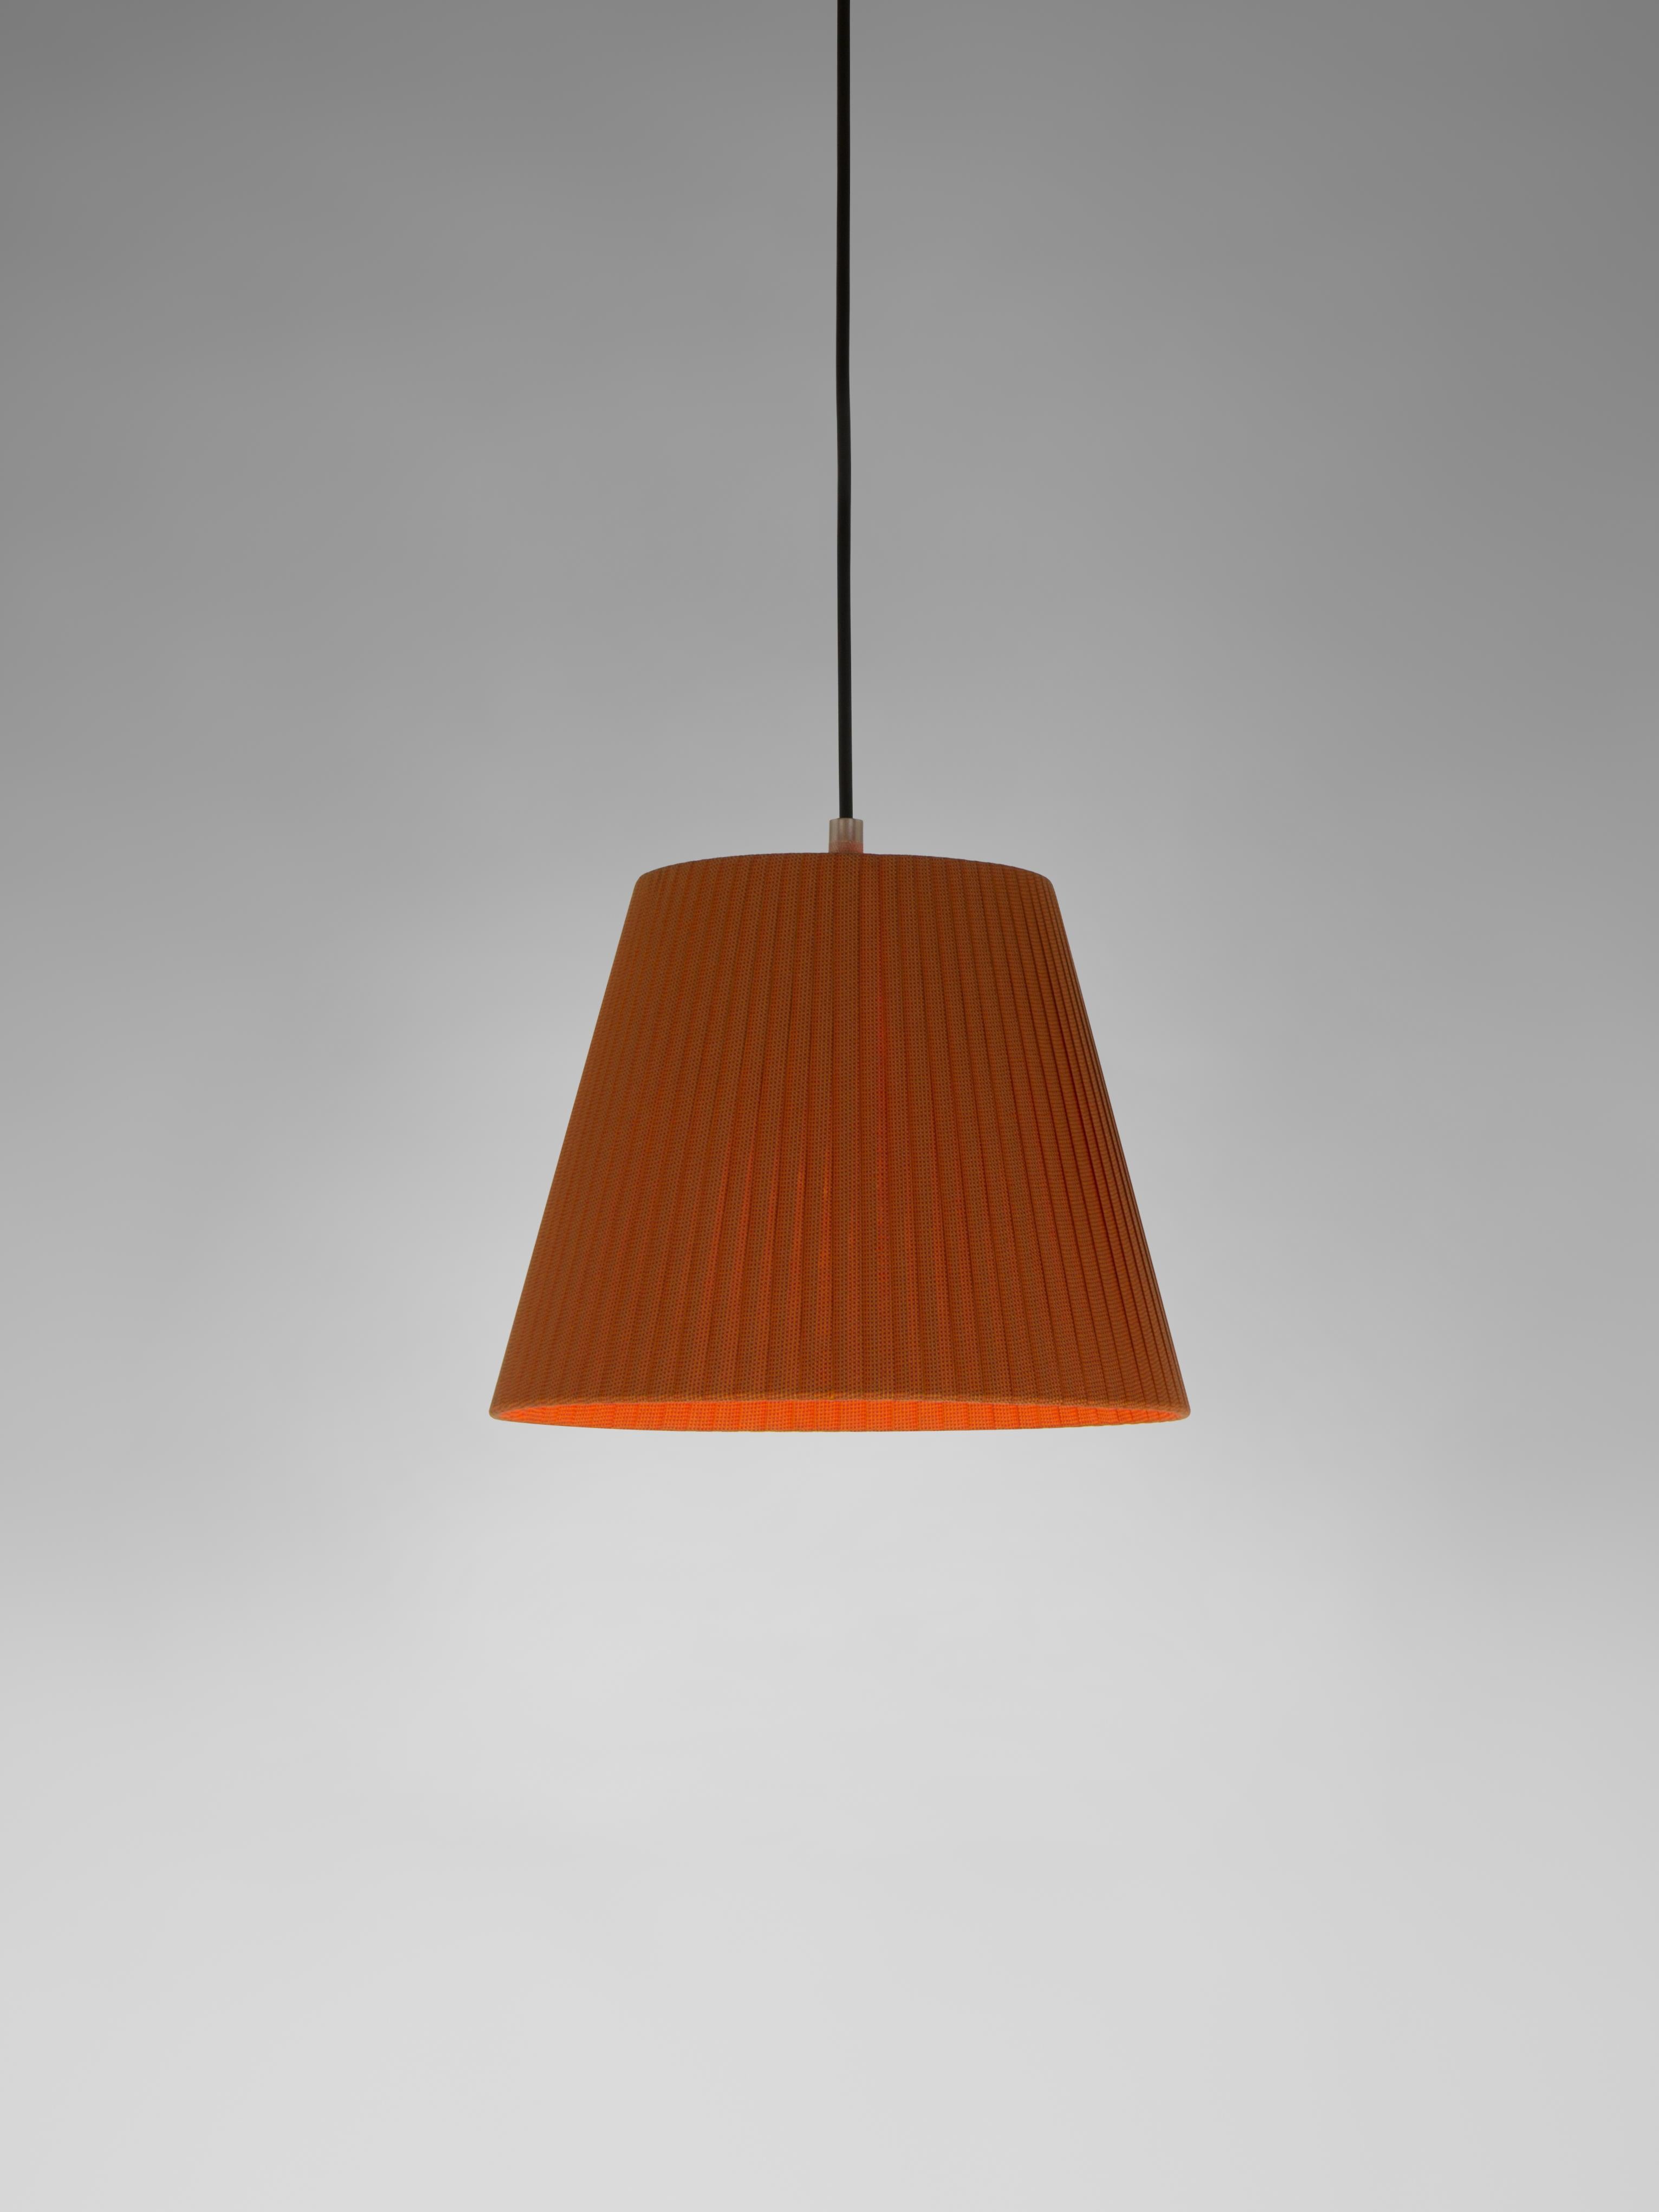 Terracotta Sísísí Cónicas MT1 pendant lamp by Santa & Cole
Dimensions: D 25 x H 20 cm.
Materials: Metal, ribbon.
Available in other colors.

The conical shape group has multiple finishes and sizes. It consists of four sizes: PT1, MT1, GT1 and